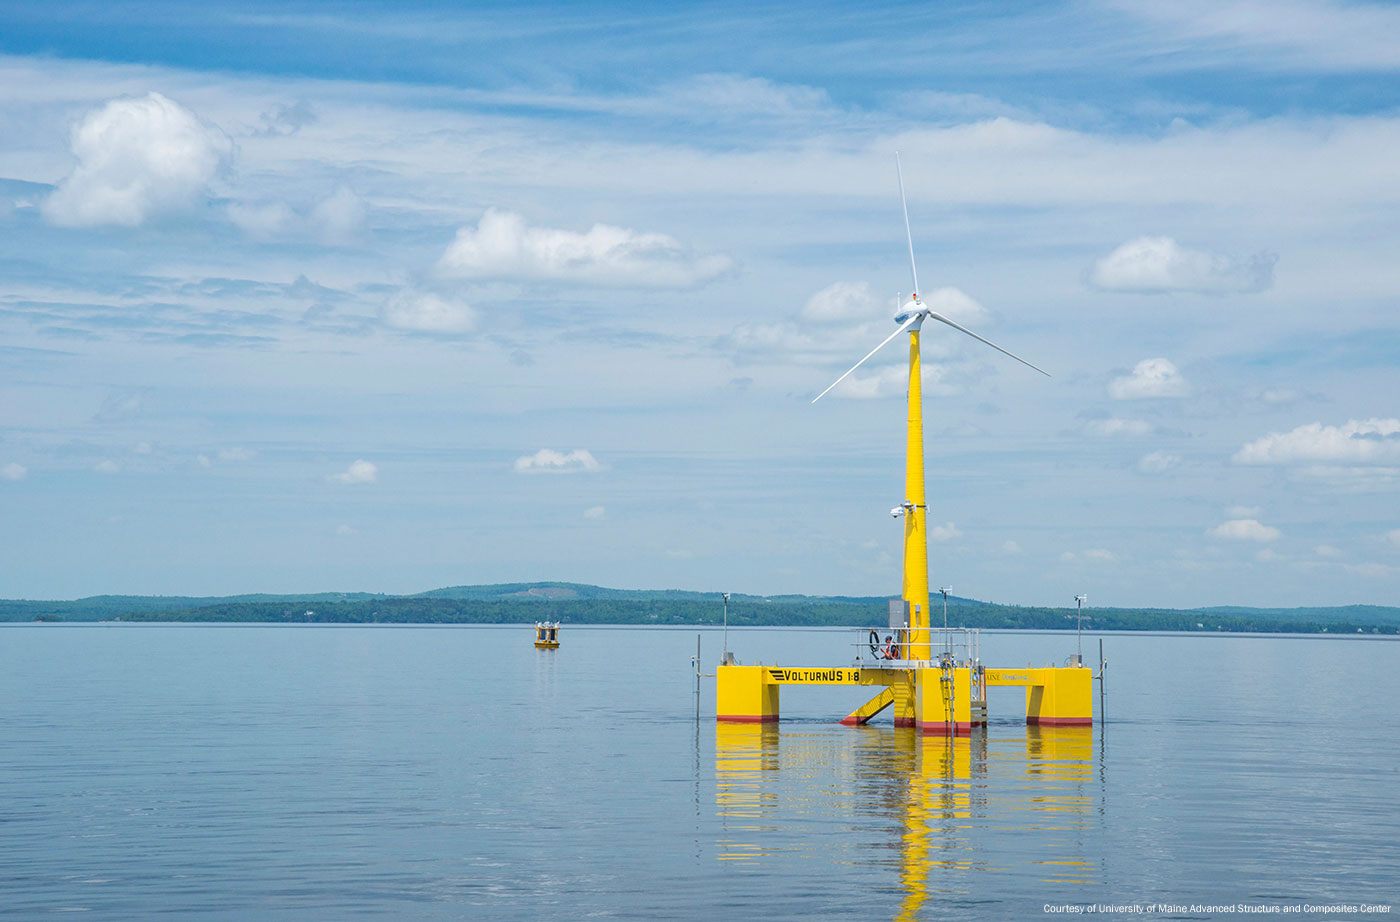 offshore wind turbine by UMaine